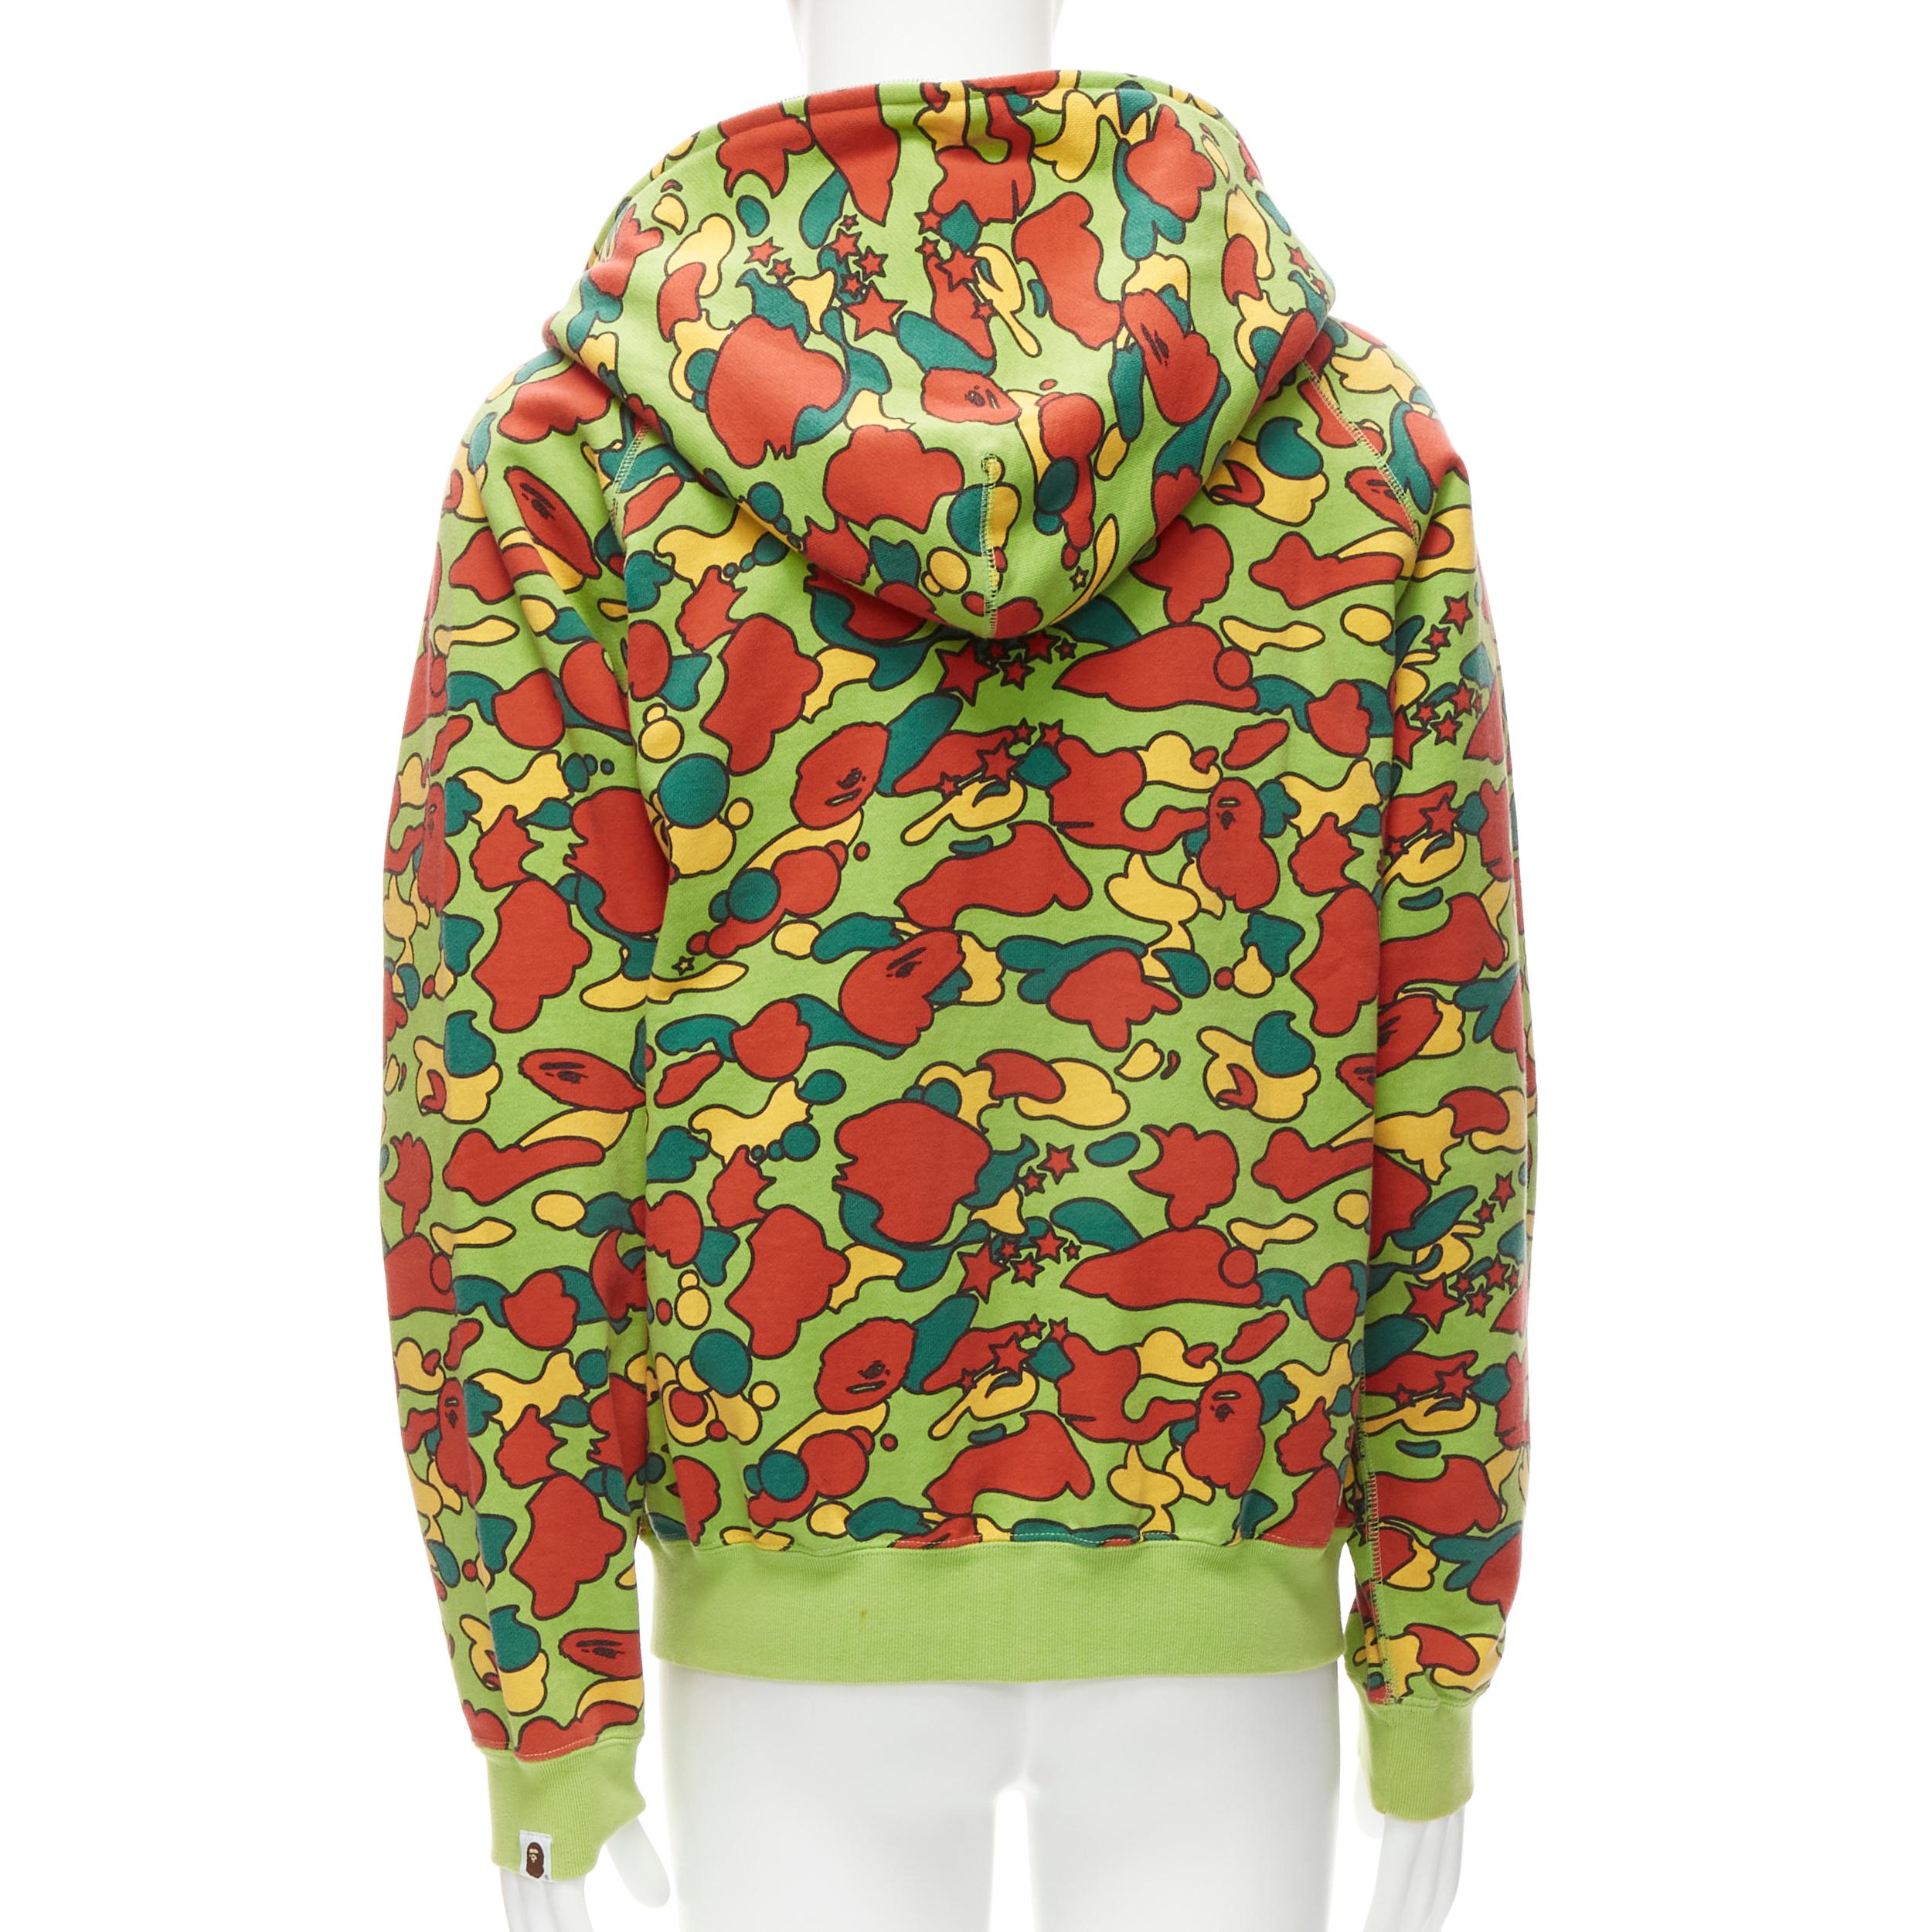 BAPE A BATHING APE Vintage green red yellow camo zip up hoodie M 1